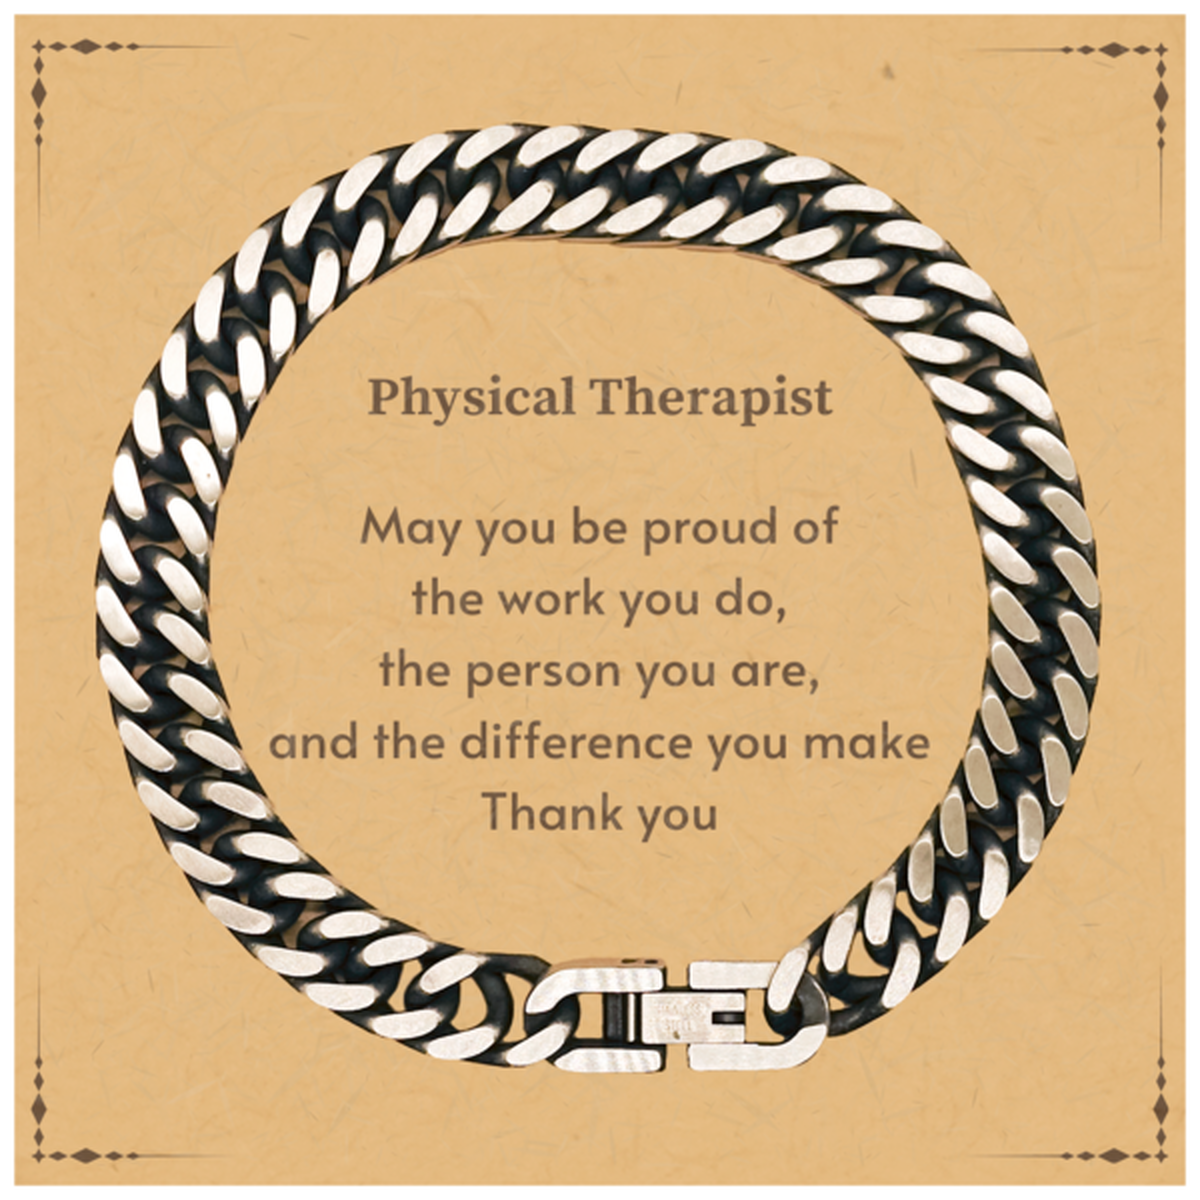 Heartwarming Cuban Link Chain Bracelet Retirement Coworkers Gifts for Physical Therapist, Physical Therapist May You be proud of the work you do, the person you are Gifts for Boss Men Women Friends